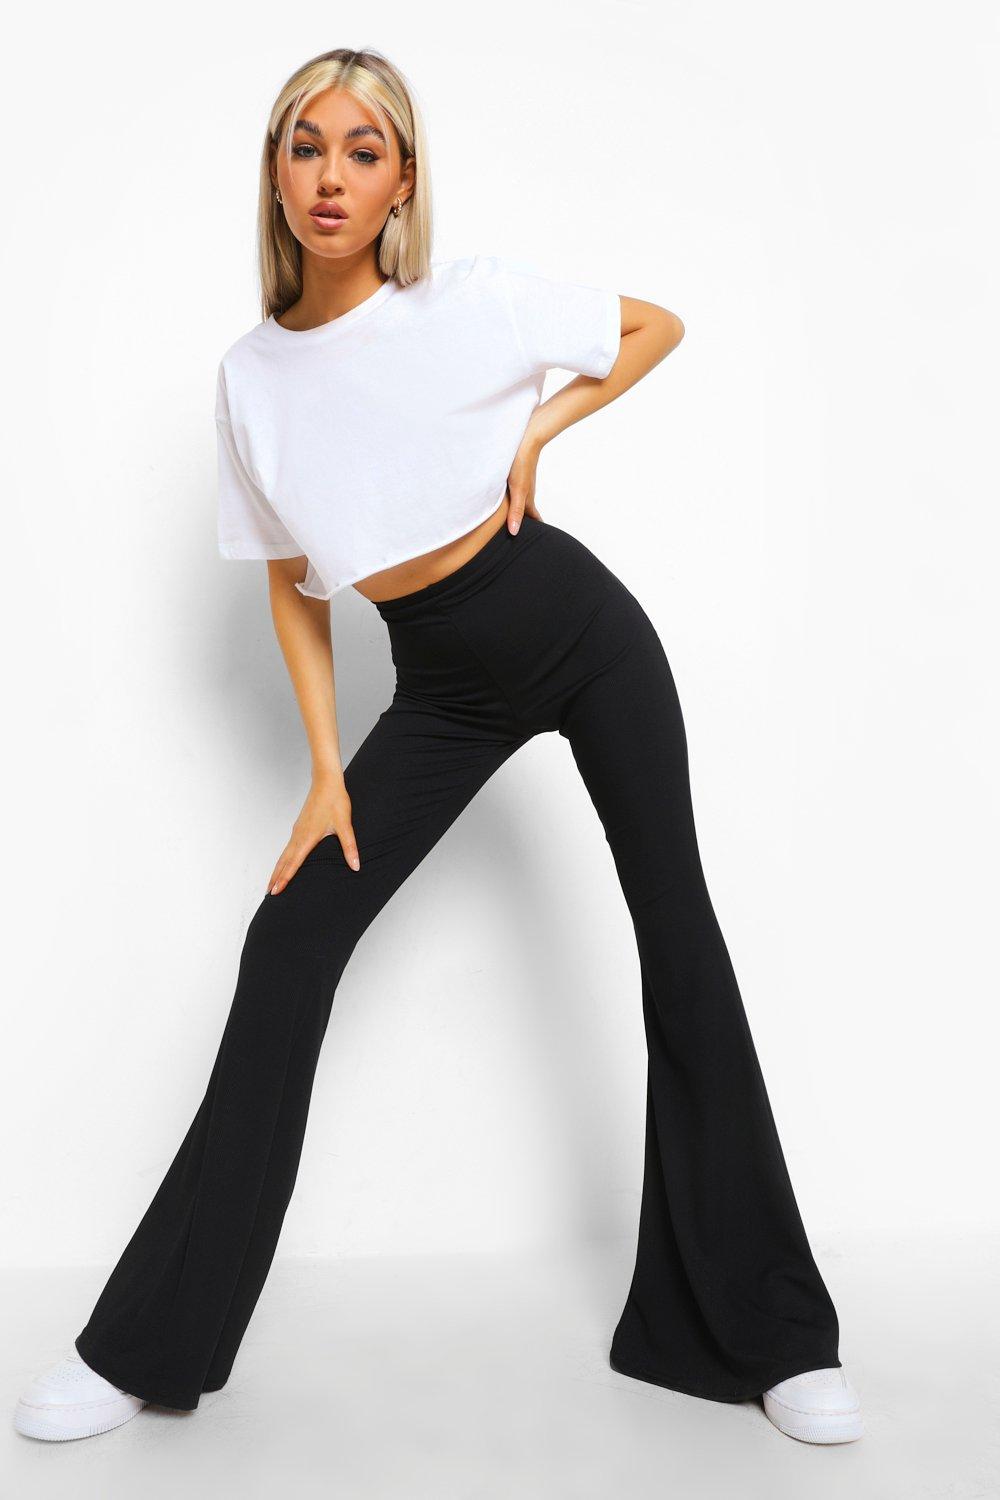 Boohoo Cotton Jersey High Waisted Flared Leggings in Black